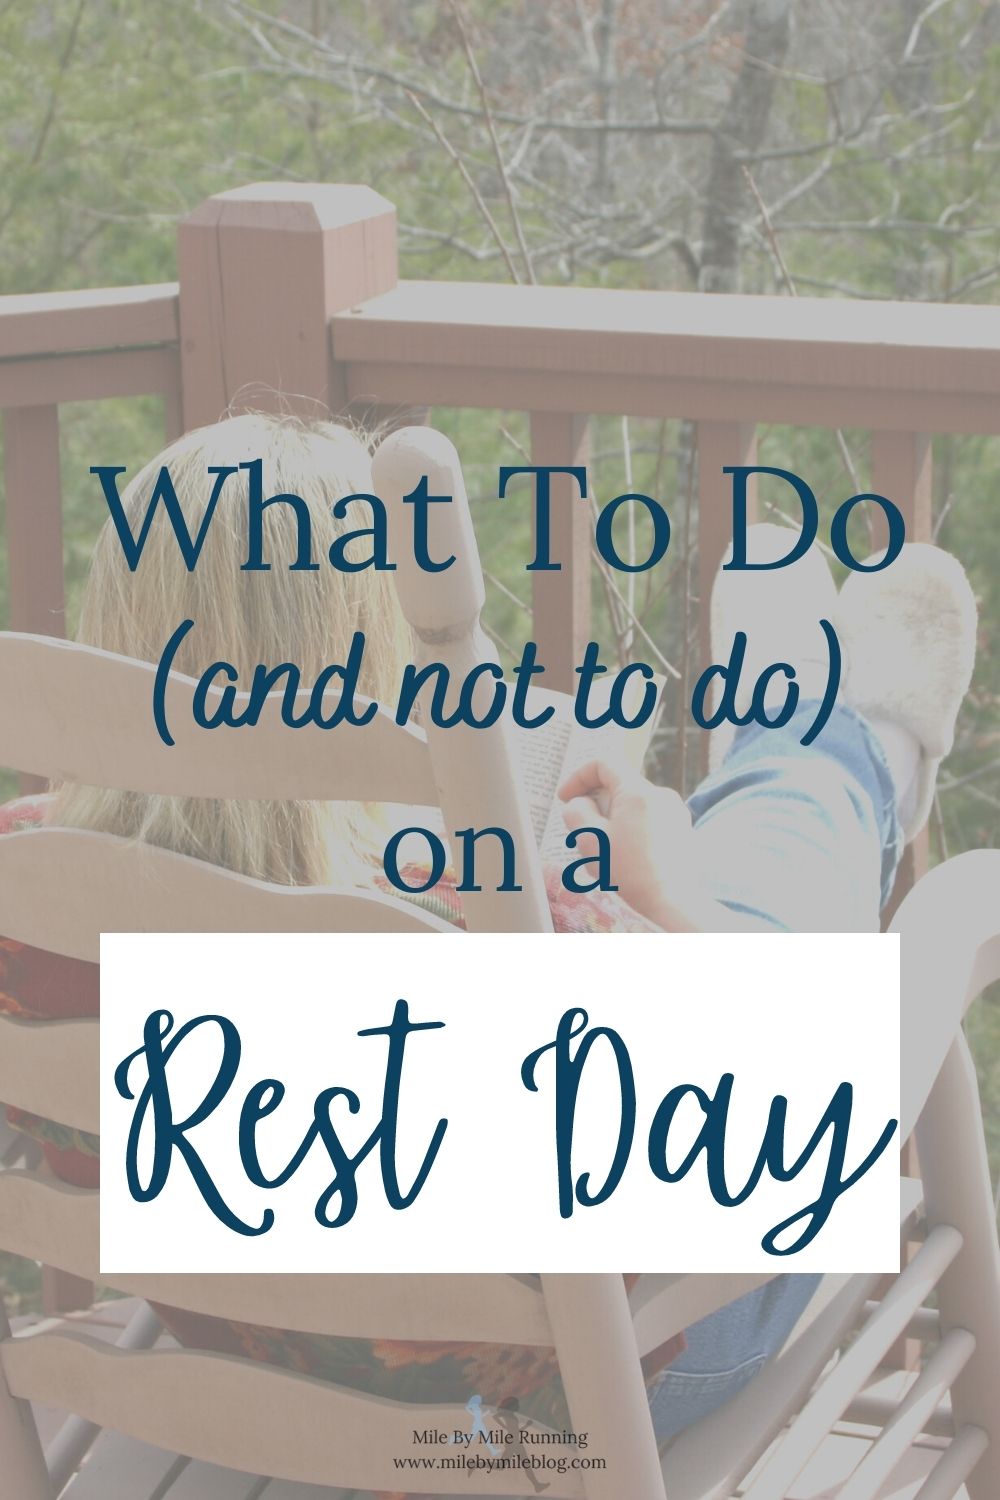 Hopefully you already know the importance of rest days and take them regularly. Some runners need several rest days a week, while others can get by with just one. There are also runners who can take them less frequently, but they are more of the exception and not the rule. So what do you do with yourself on a rest day?